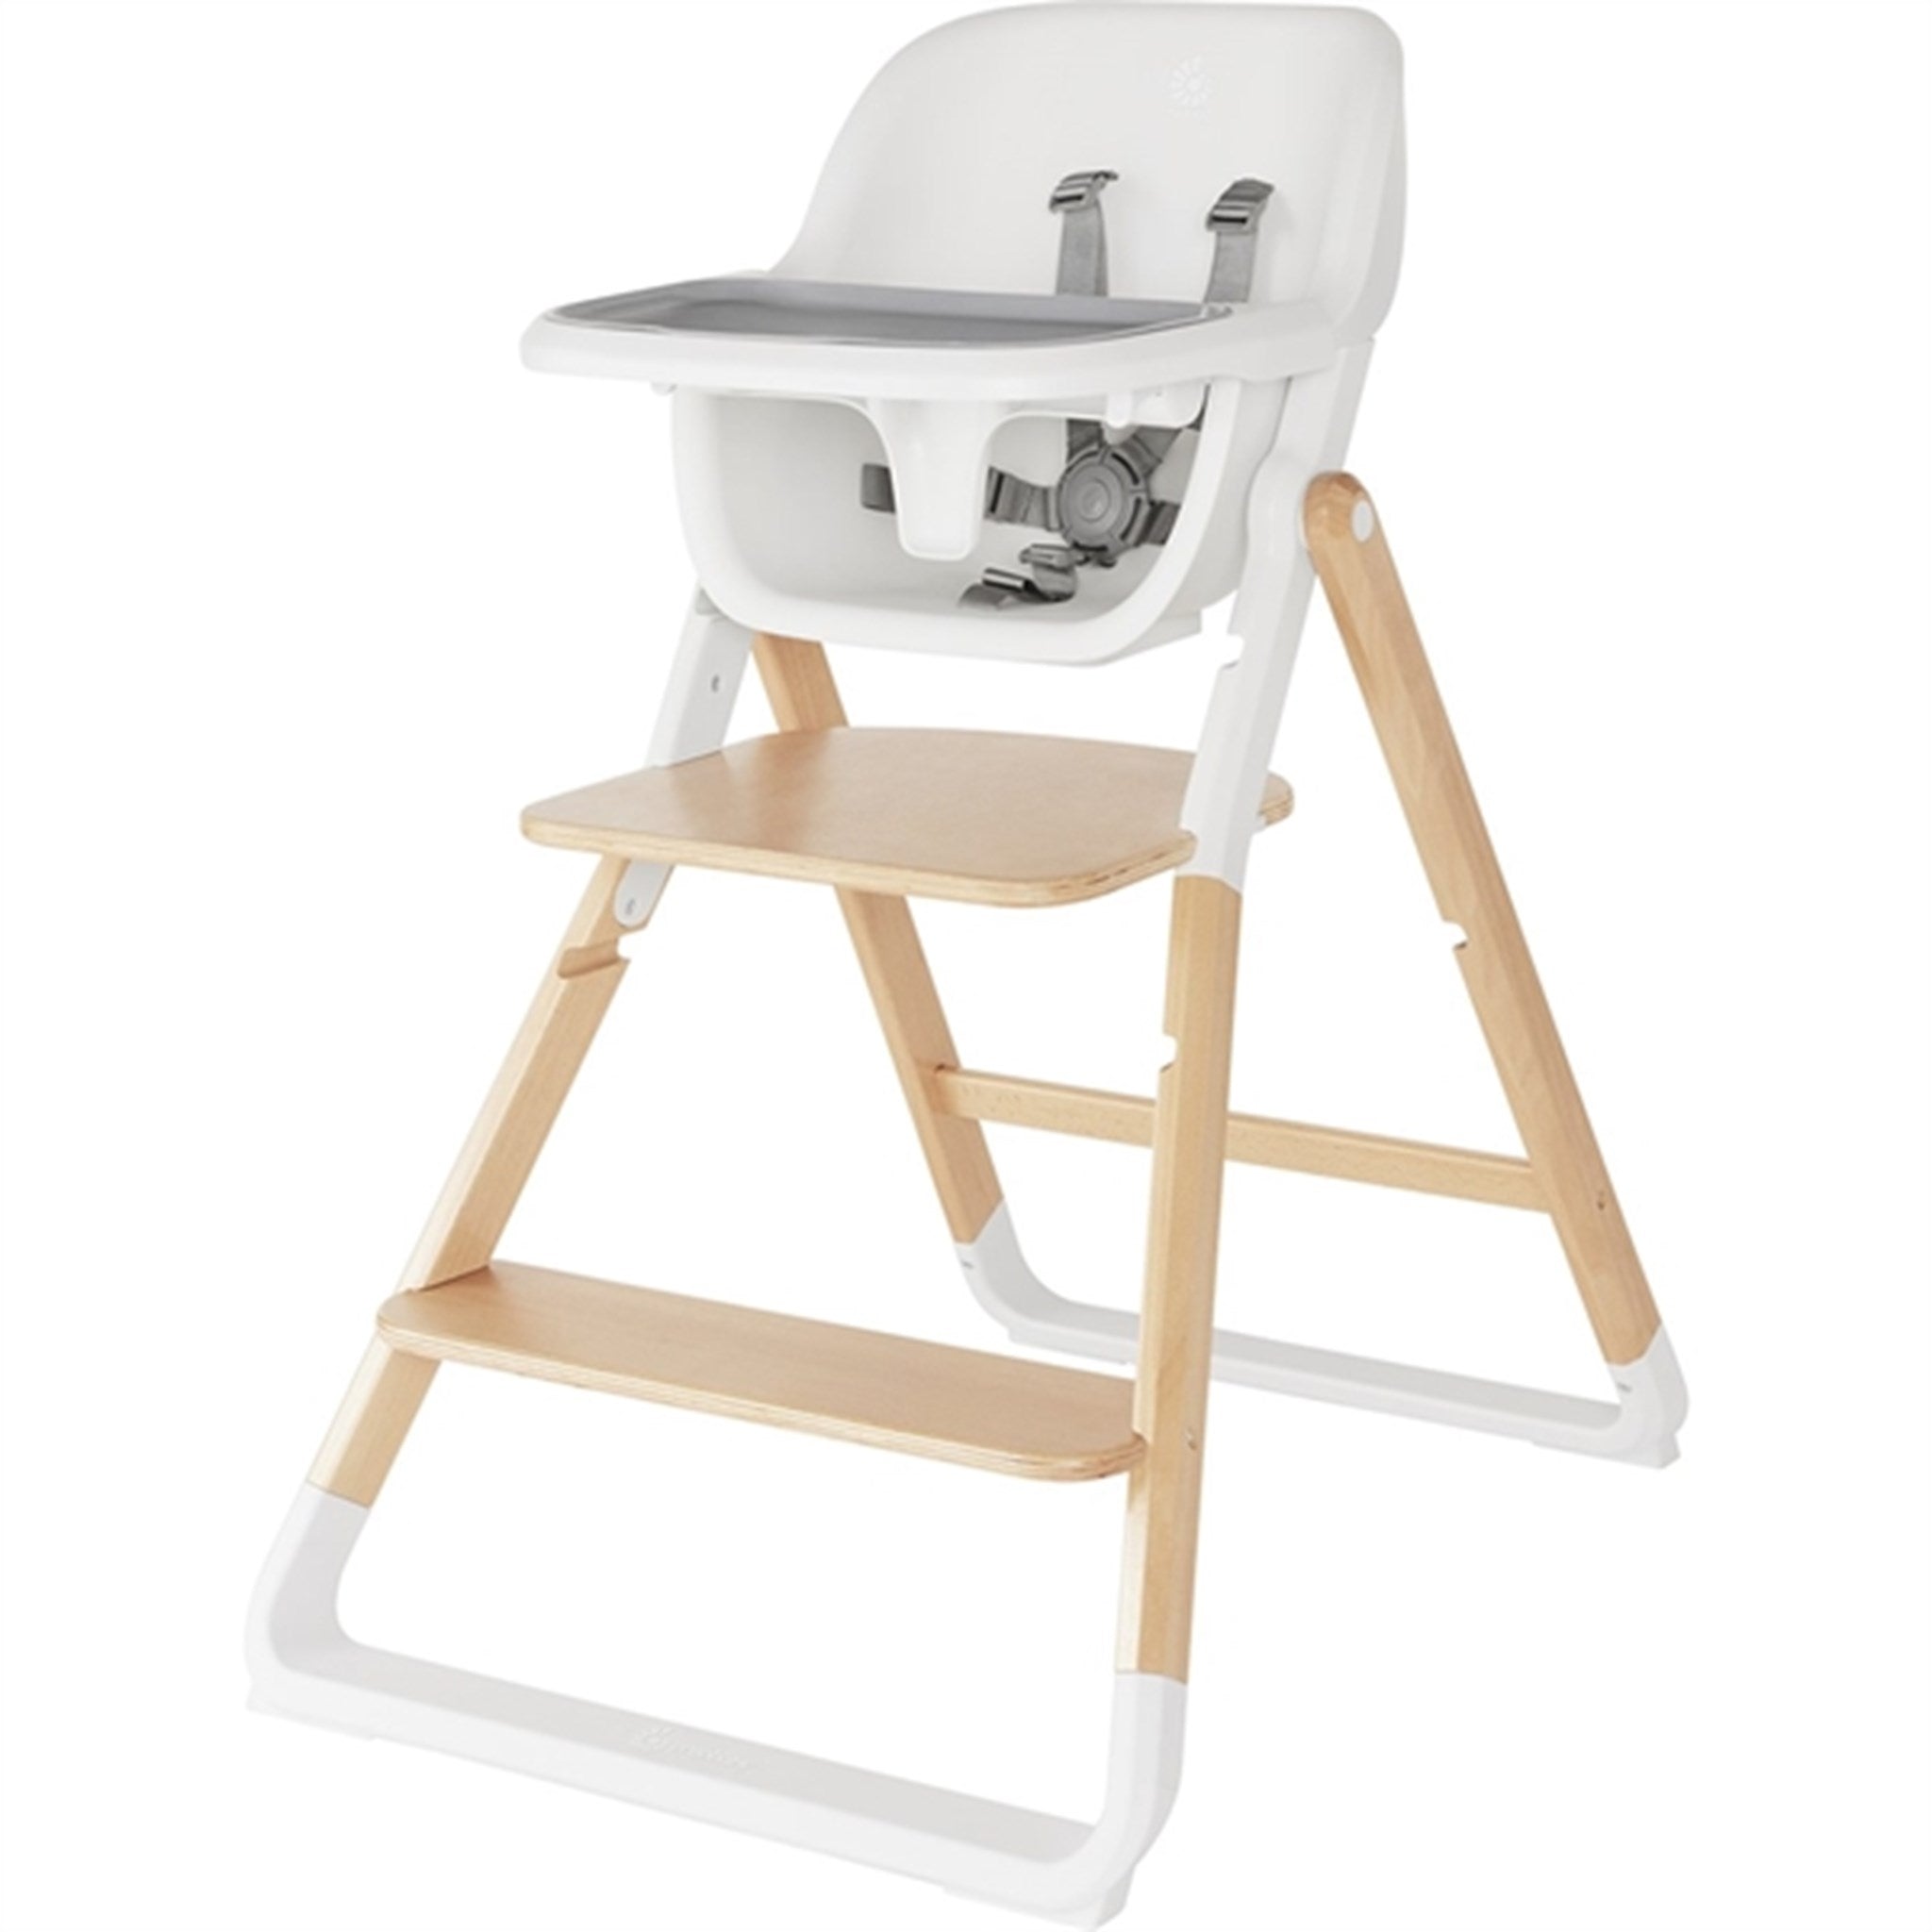 Ergobaby Evolve 2-in-1 High Chair + Chair Natural Wood White 7